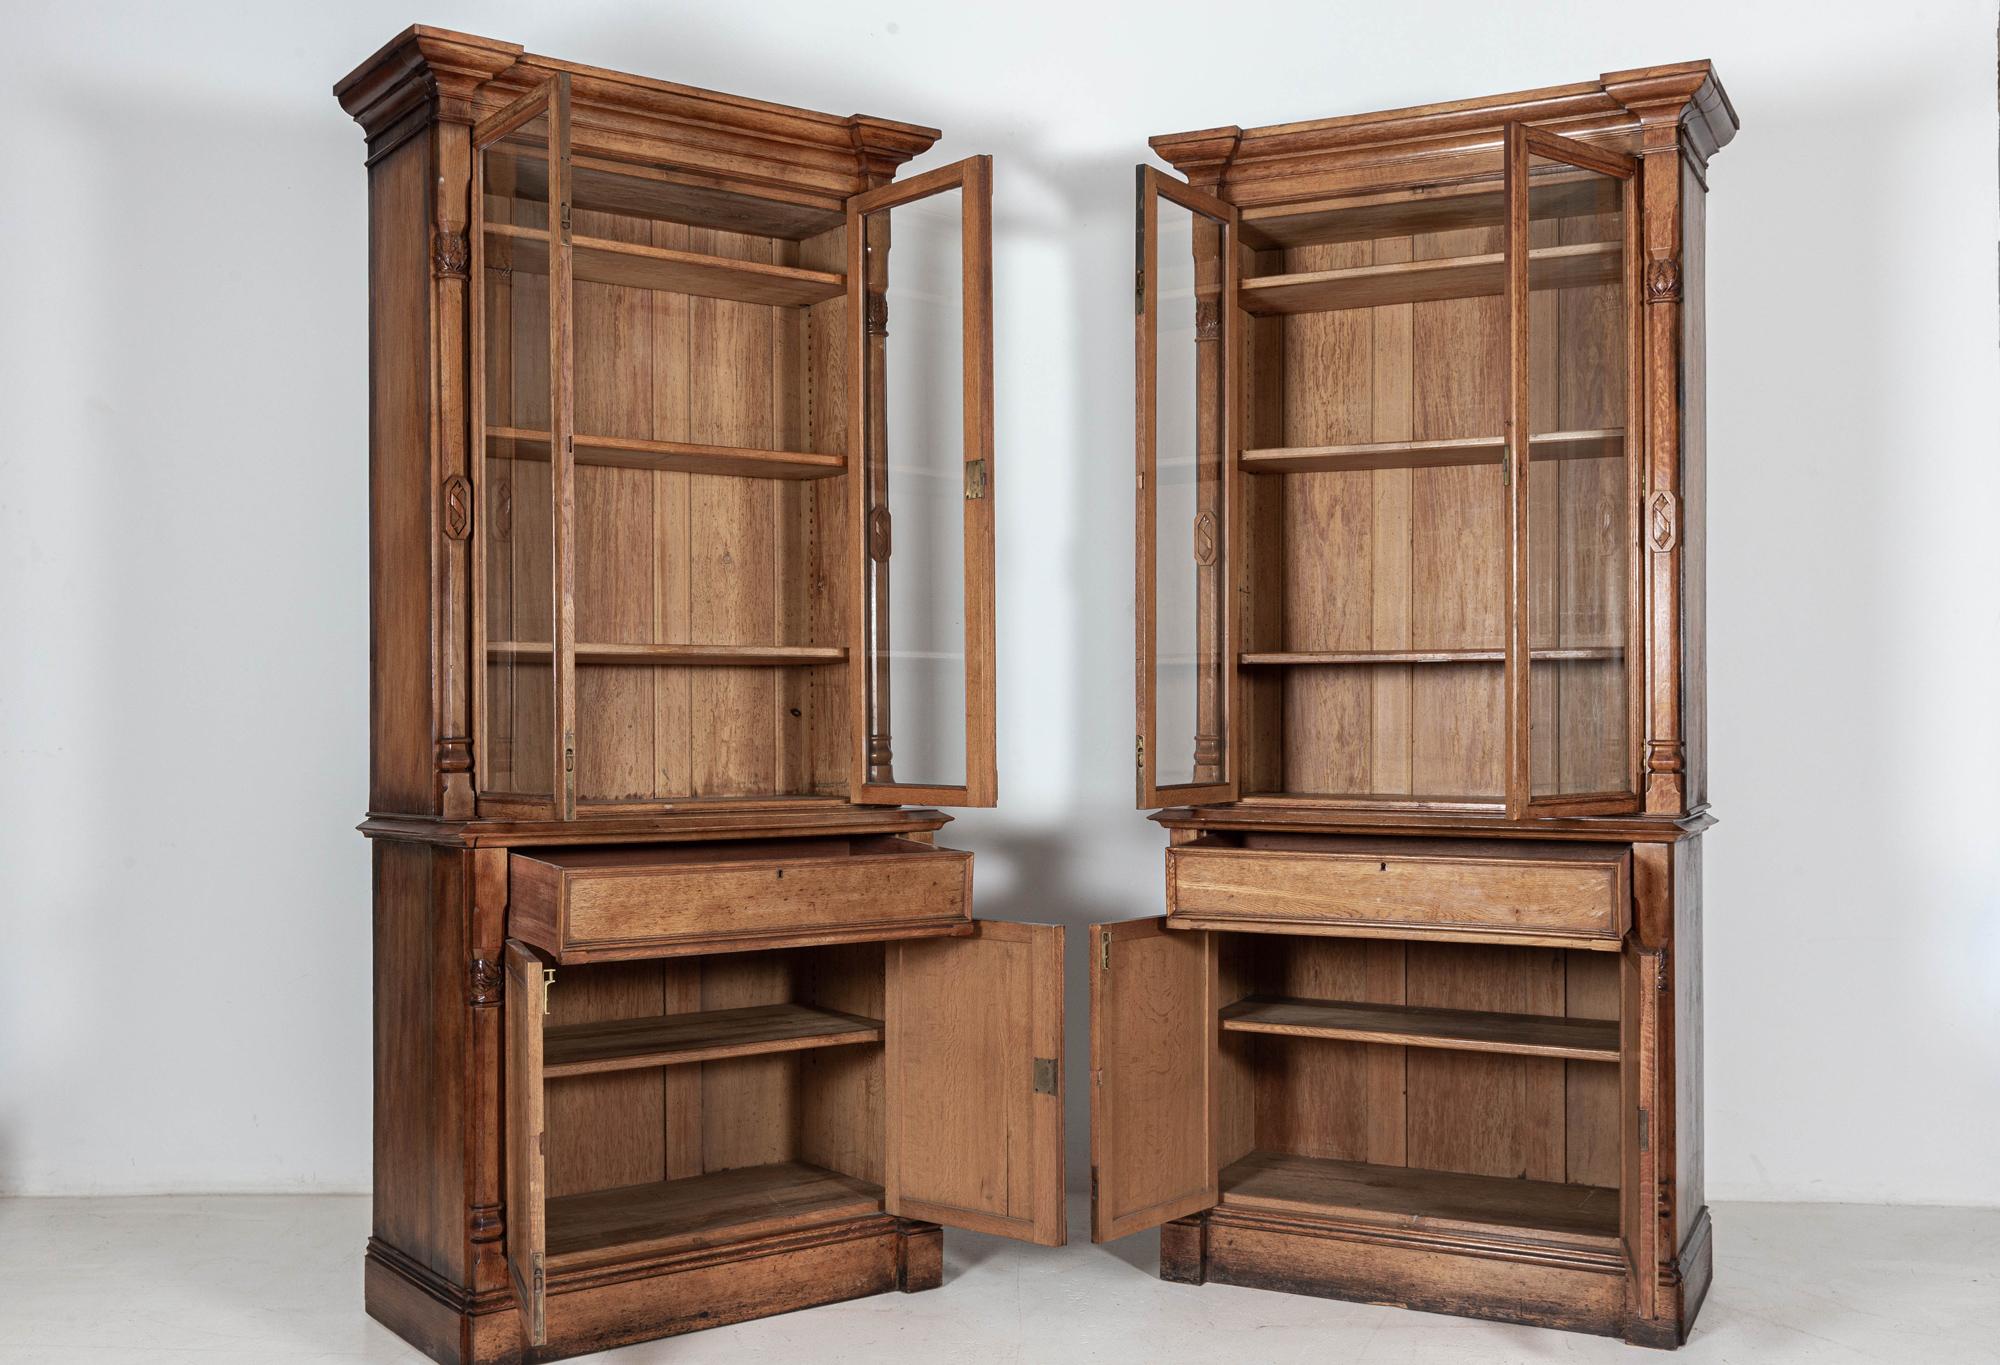 Circa 1860

Pair English 19thC oak bookcase cabinets

Adjustable top cabinet shelves

Provenance: Acquired from the ‘Old Palace’ in Worcester England.

The Old Palace, Worcester is an English listed historic building, built c.1200, adjacent